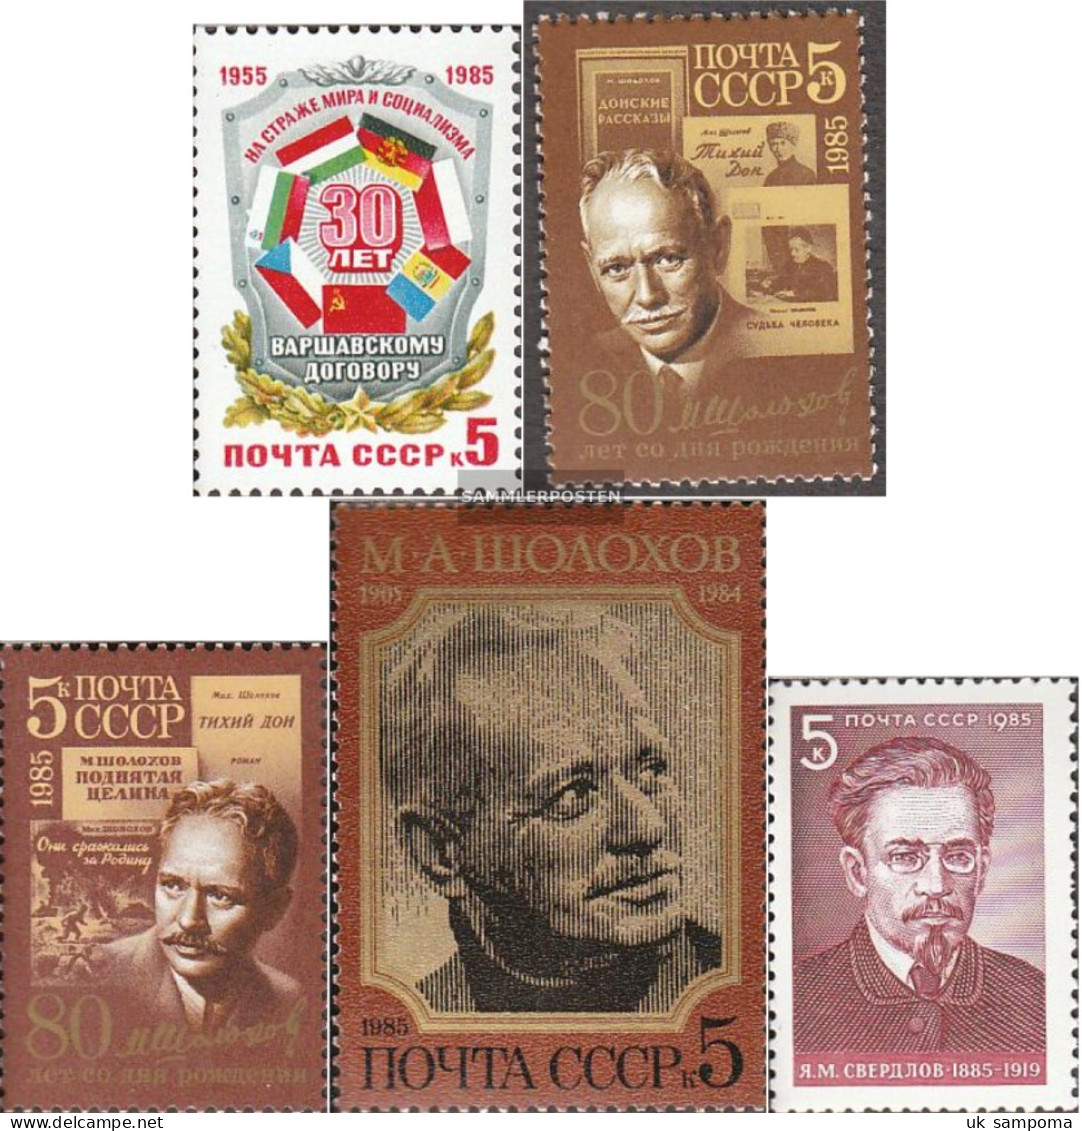 Soviet Union 5508,5509-5511,5512 (complete Issue) Unmounted Mint / Never Hinged 1985 Warsaw Pact, Scholochow, Swerdl - Neufs